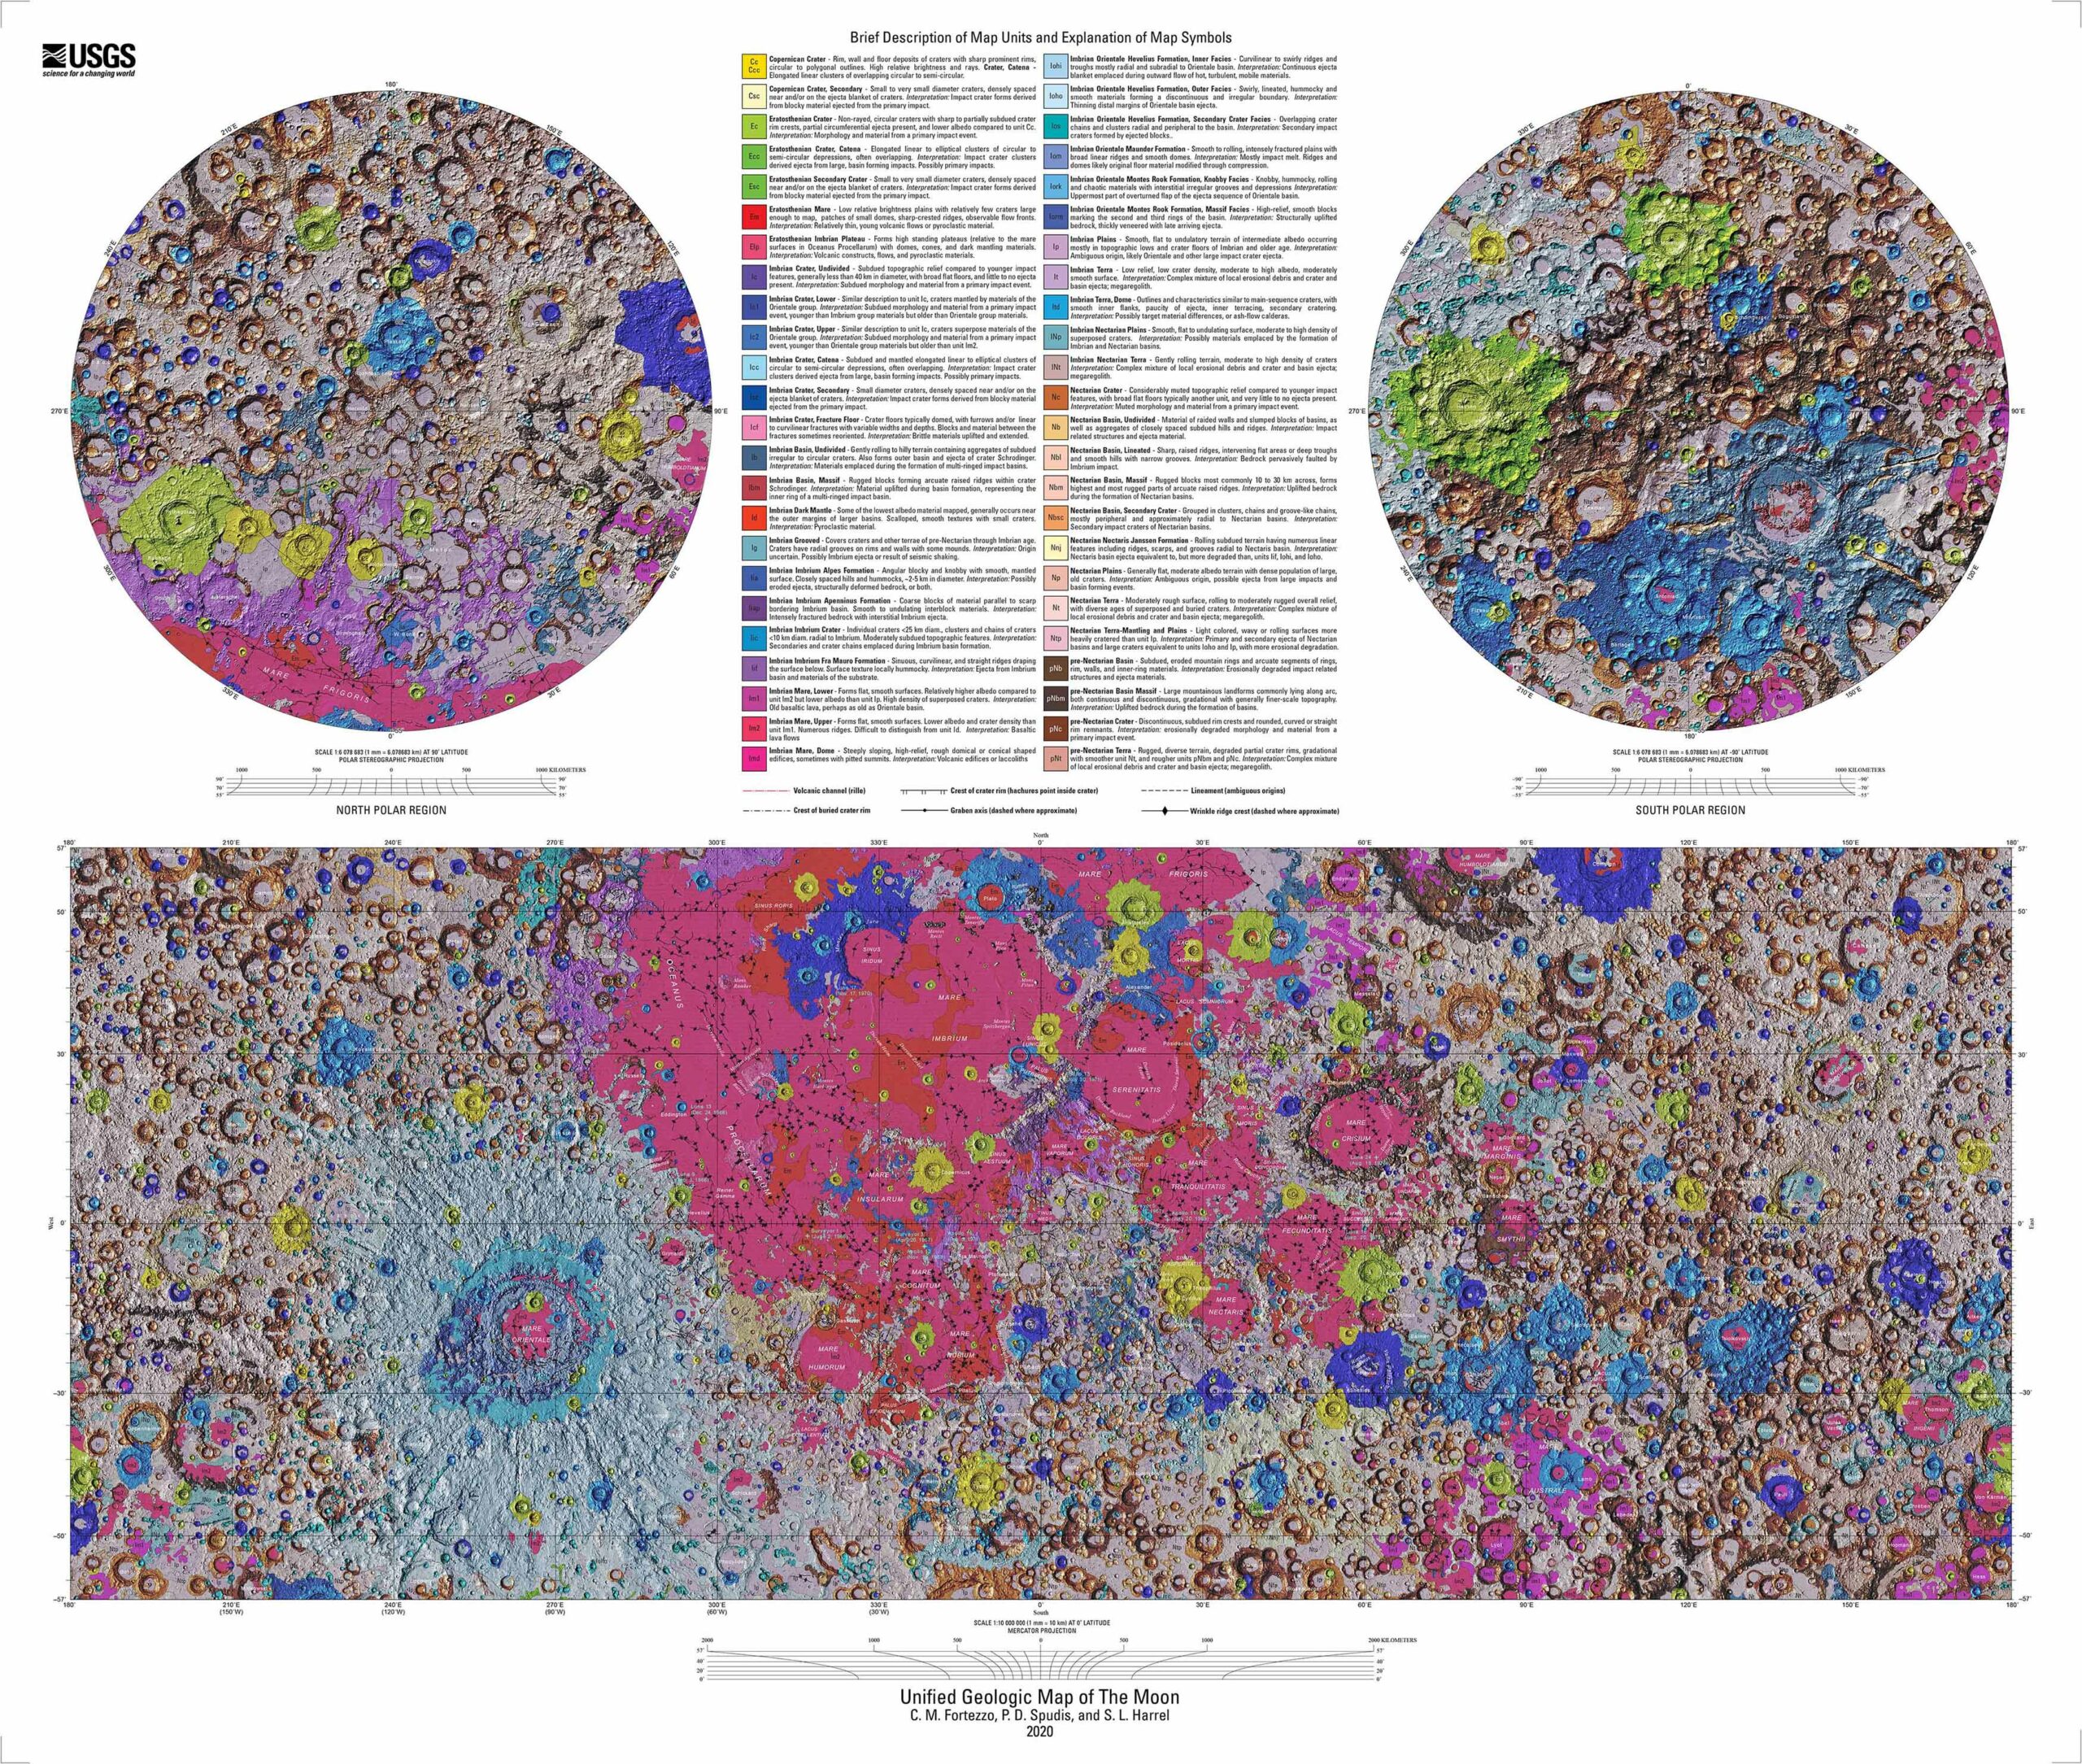 Unified_Geologic_Map_of_The_Moon_200dpi-